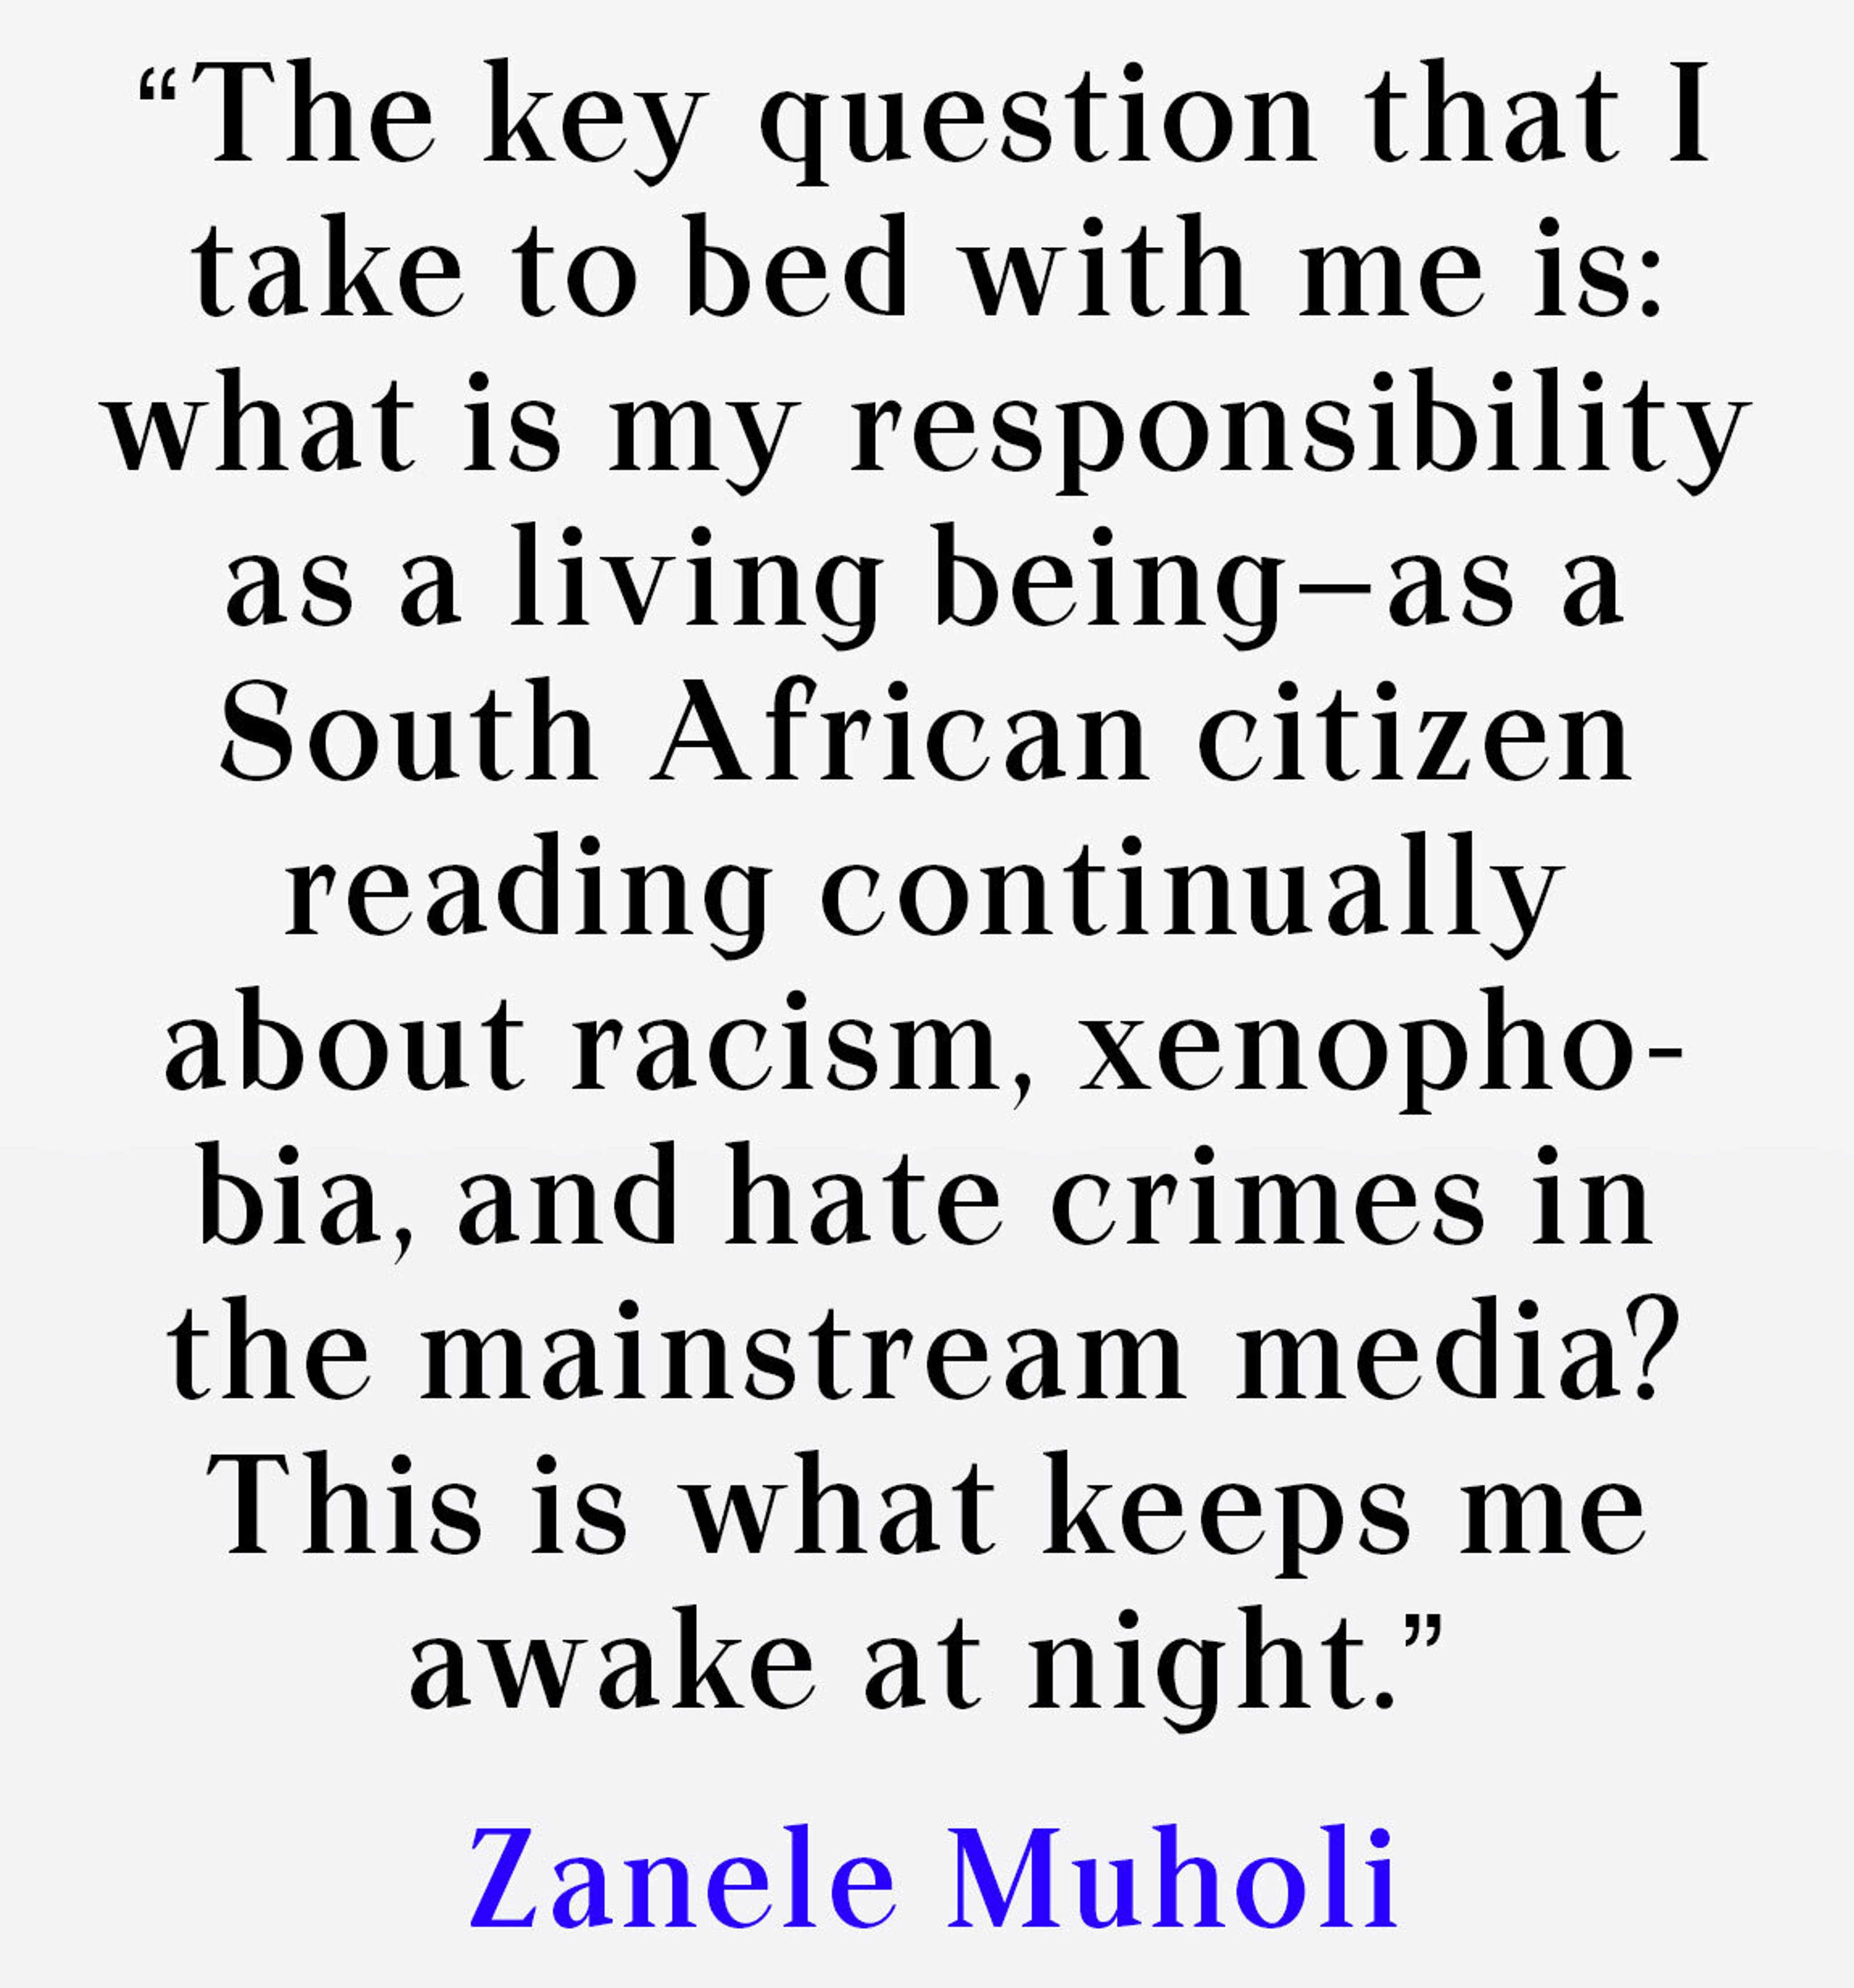 The key question that I take to bed with me is: what is my responsibility as a living being—as a South African citizen reading continually about racism, xenophobia, and hate crimes in the mainstream media? This is what keeps me awake at night. 